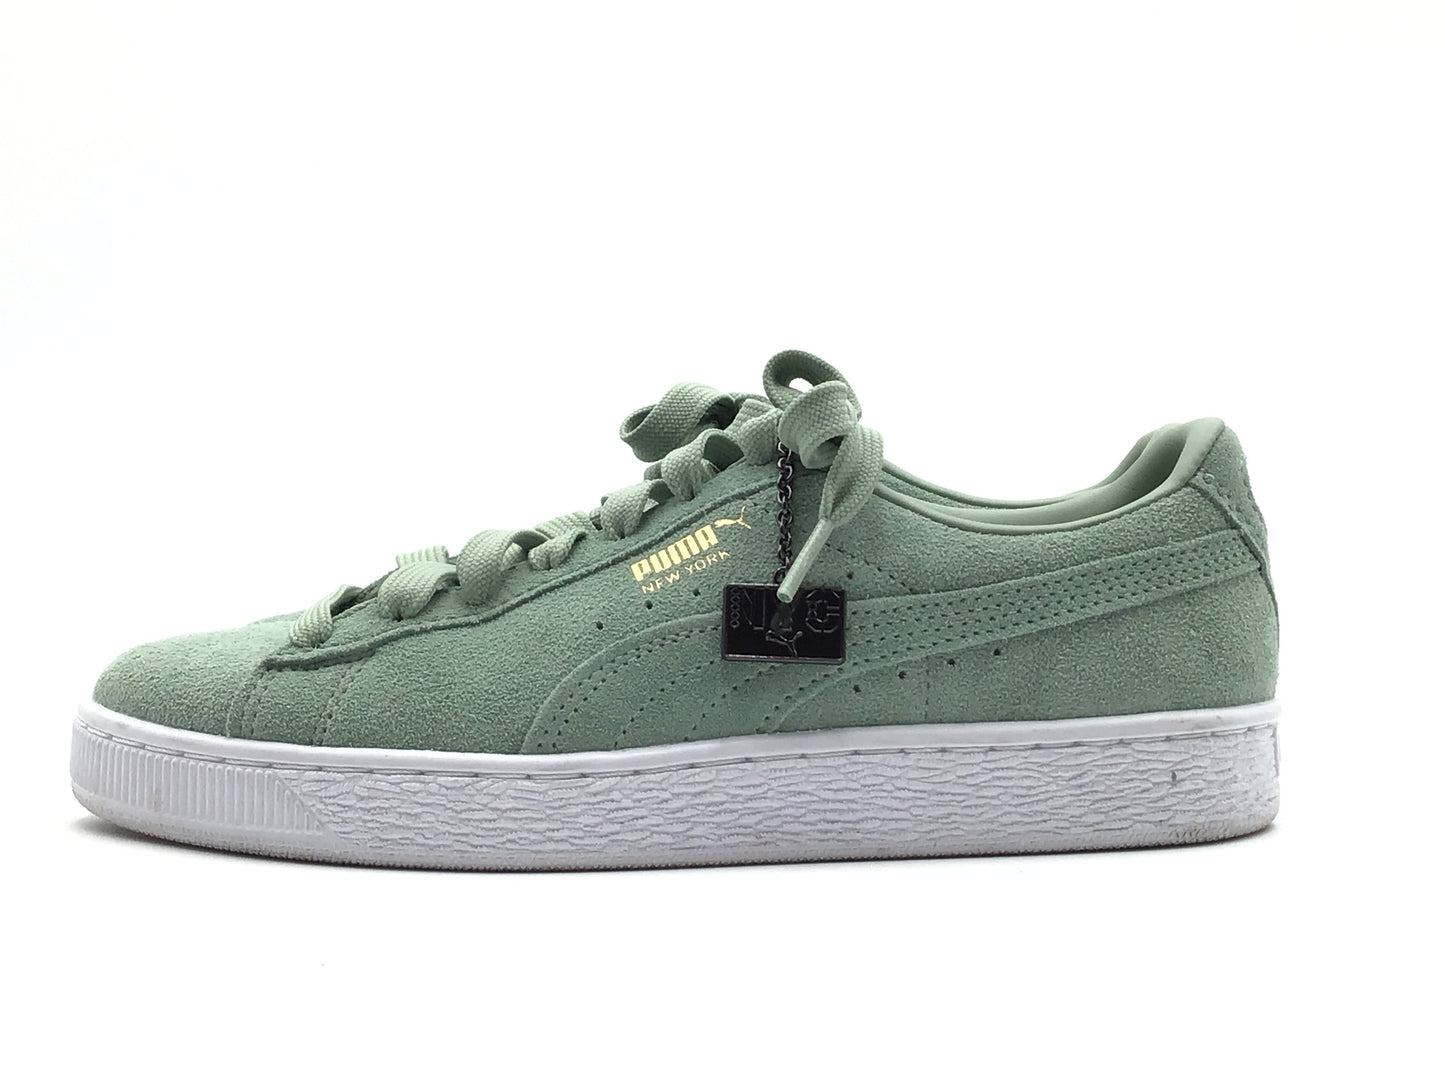 Green Shoes Sneakers Puma, Size 7